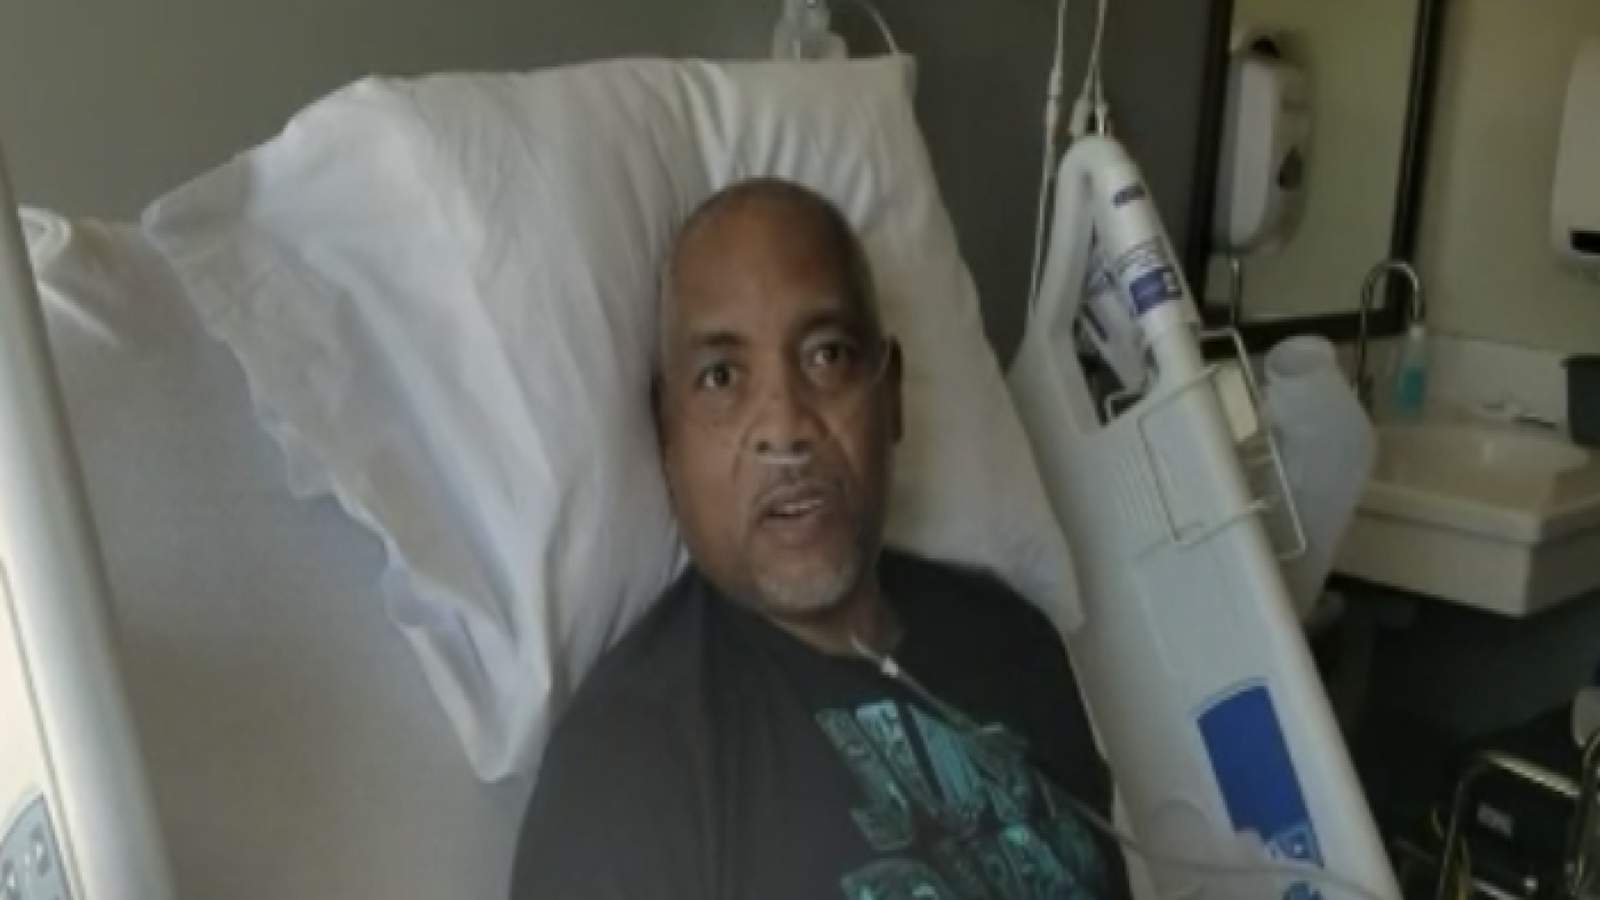 Parole officer in Harris County heading home after battling COVID-19 for 5 months